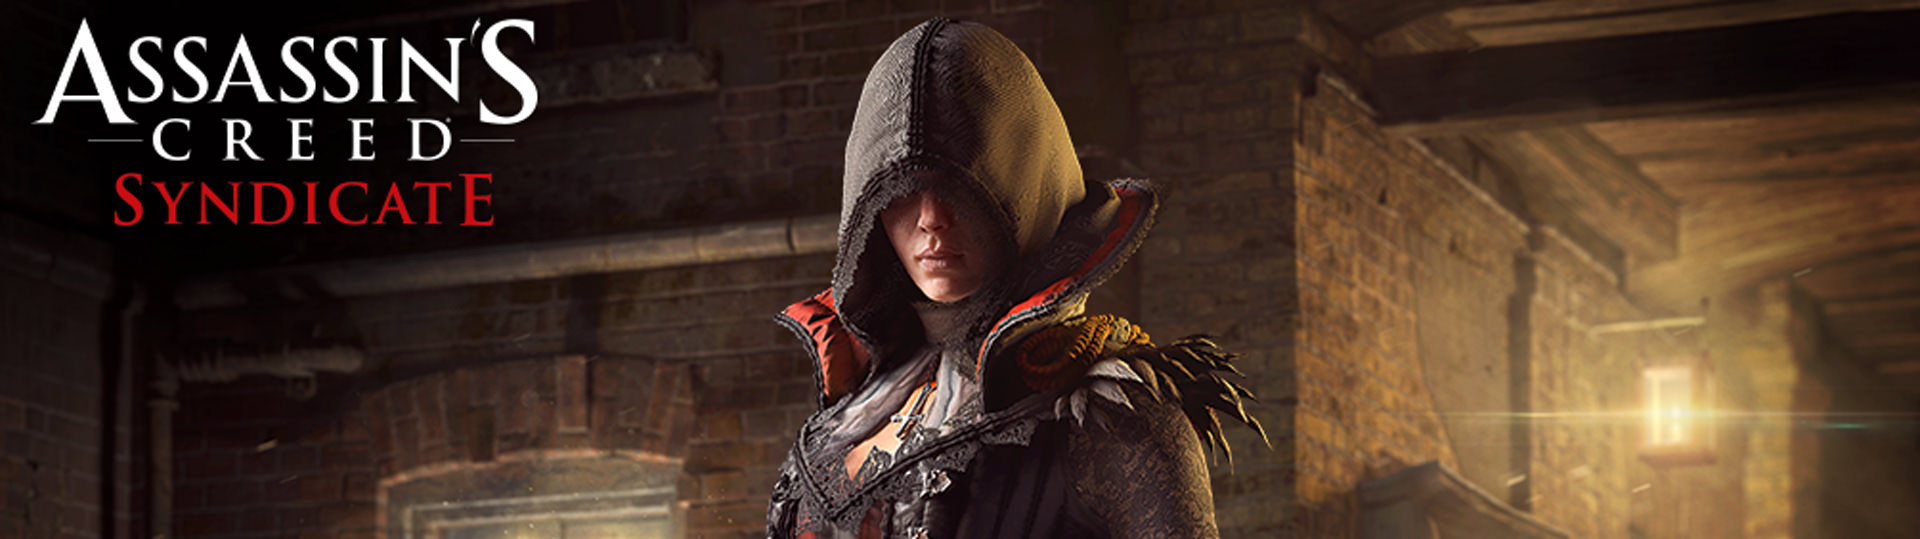 Buy Assassin's Creed Syndicate - Victorian Legends Pack